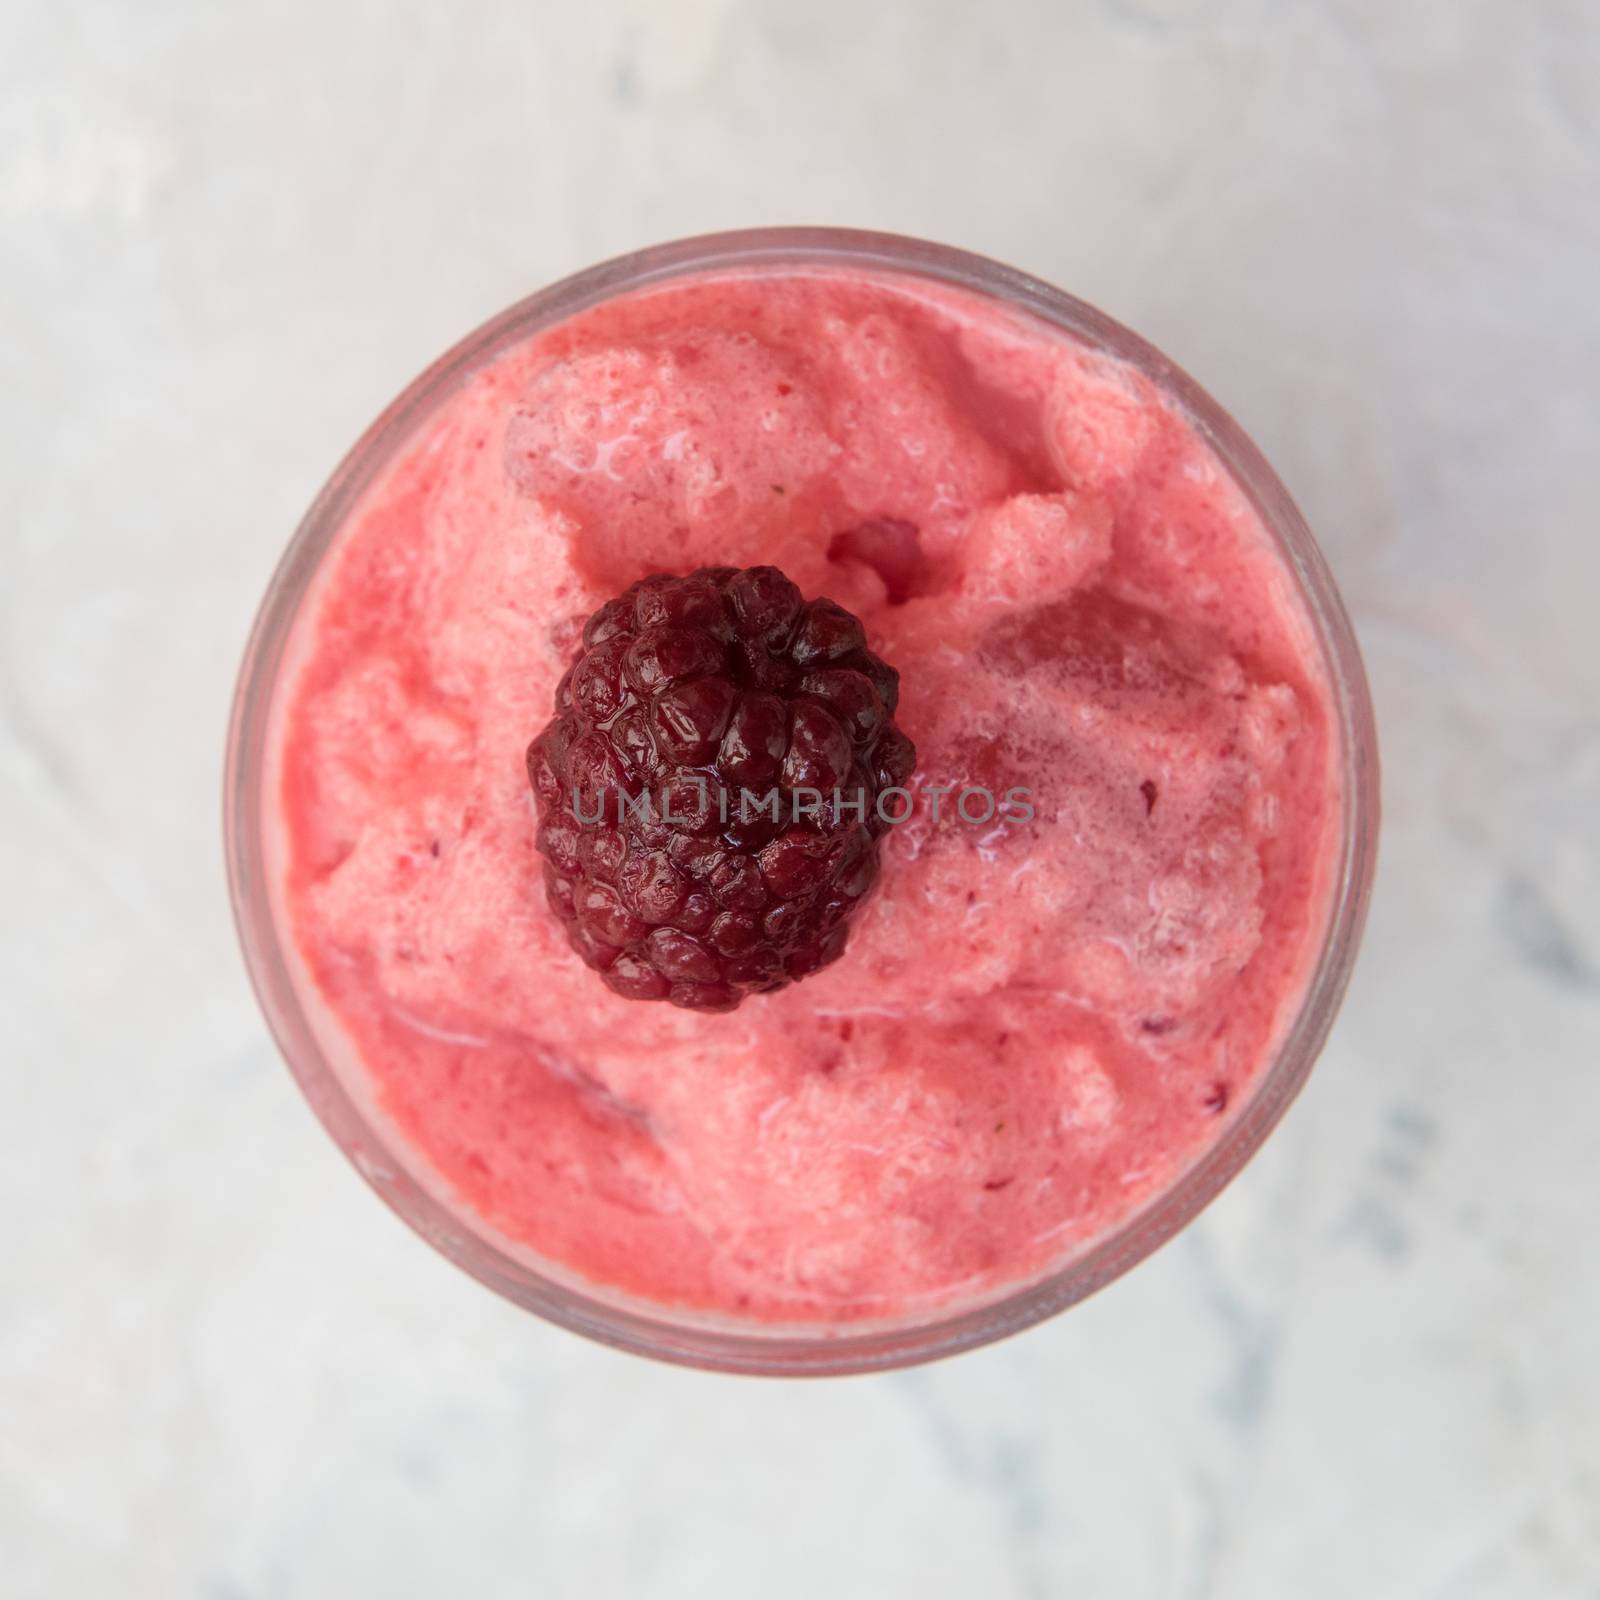 Blackberry smoothie on a white by rusak